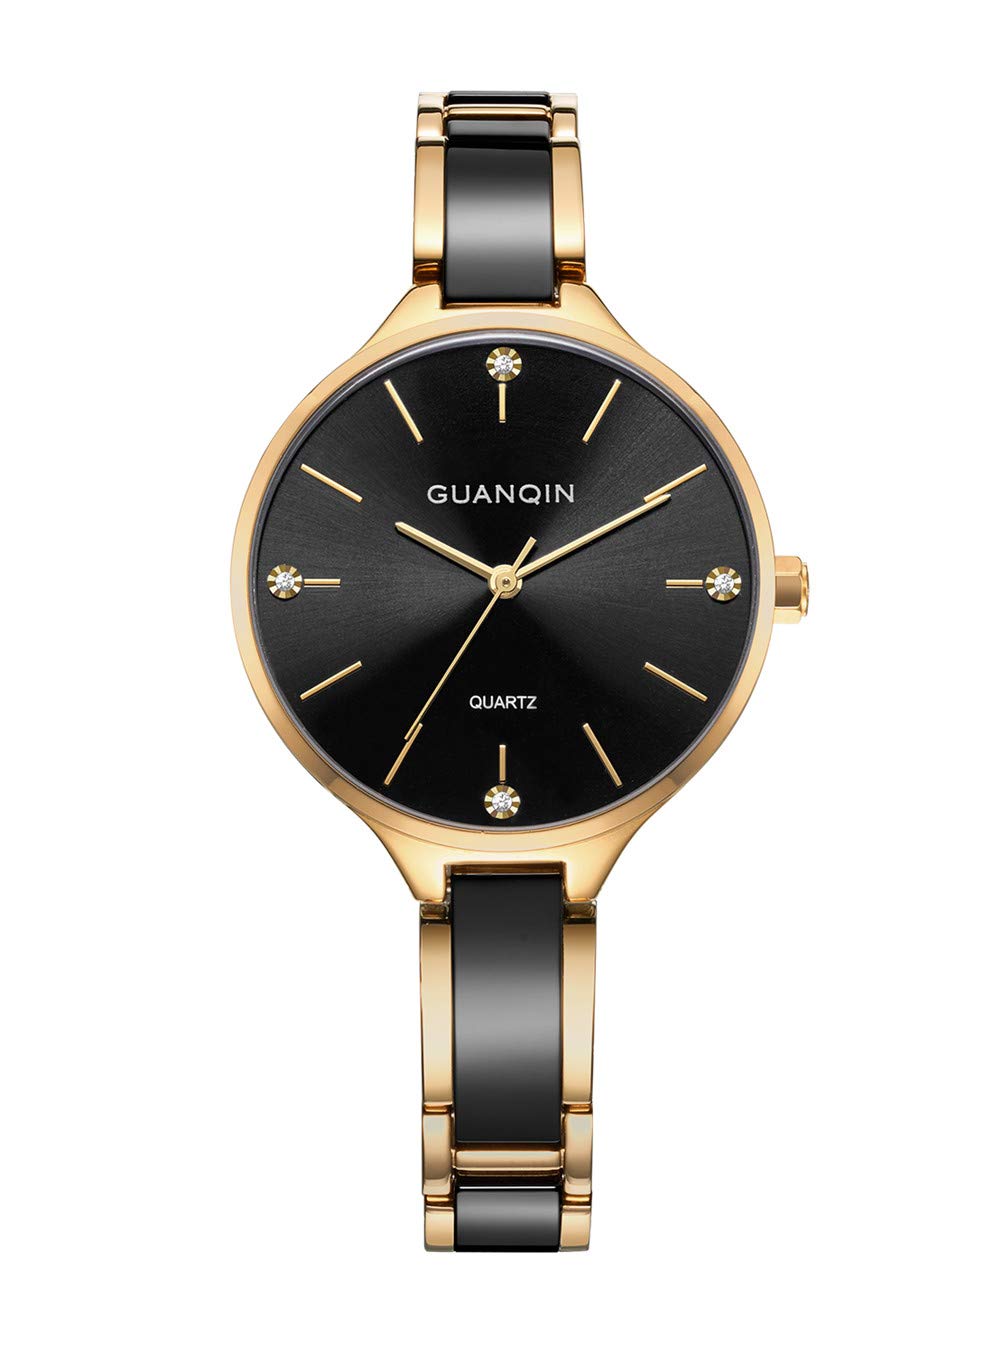 Guanqin Women's Quartz Watch with Dial Analog Display and Ceramic Band